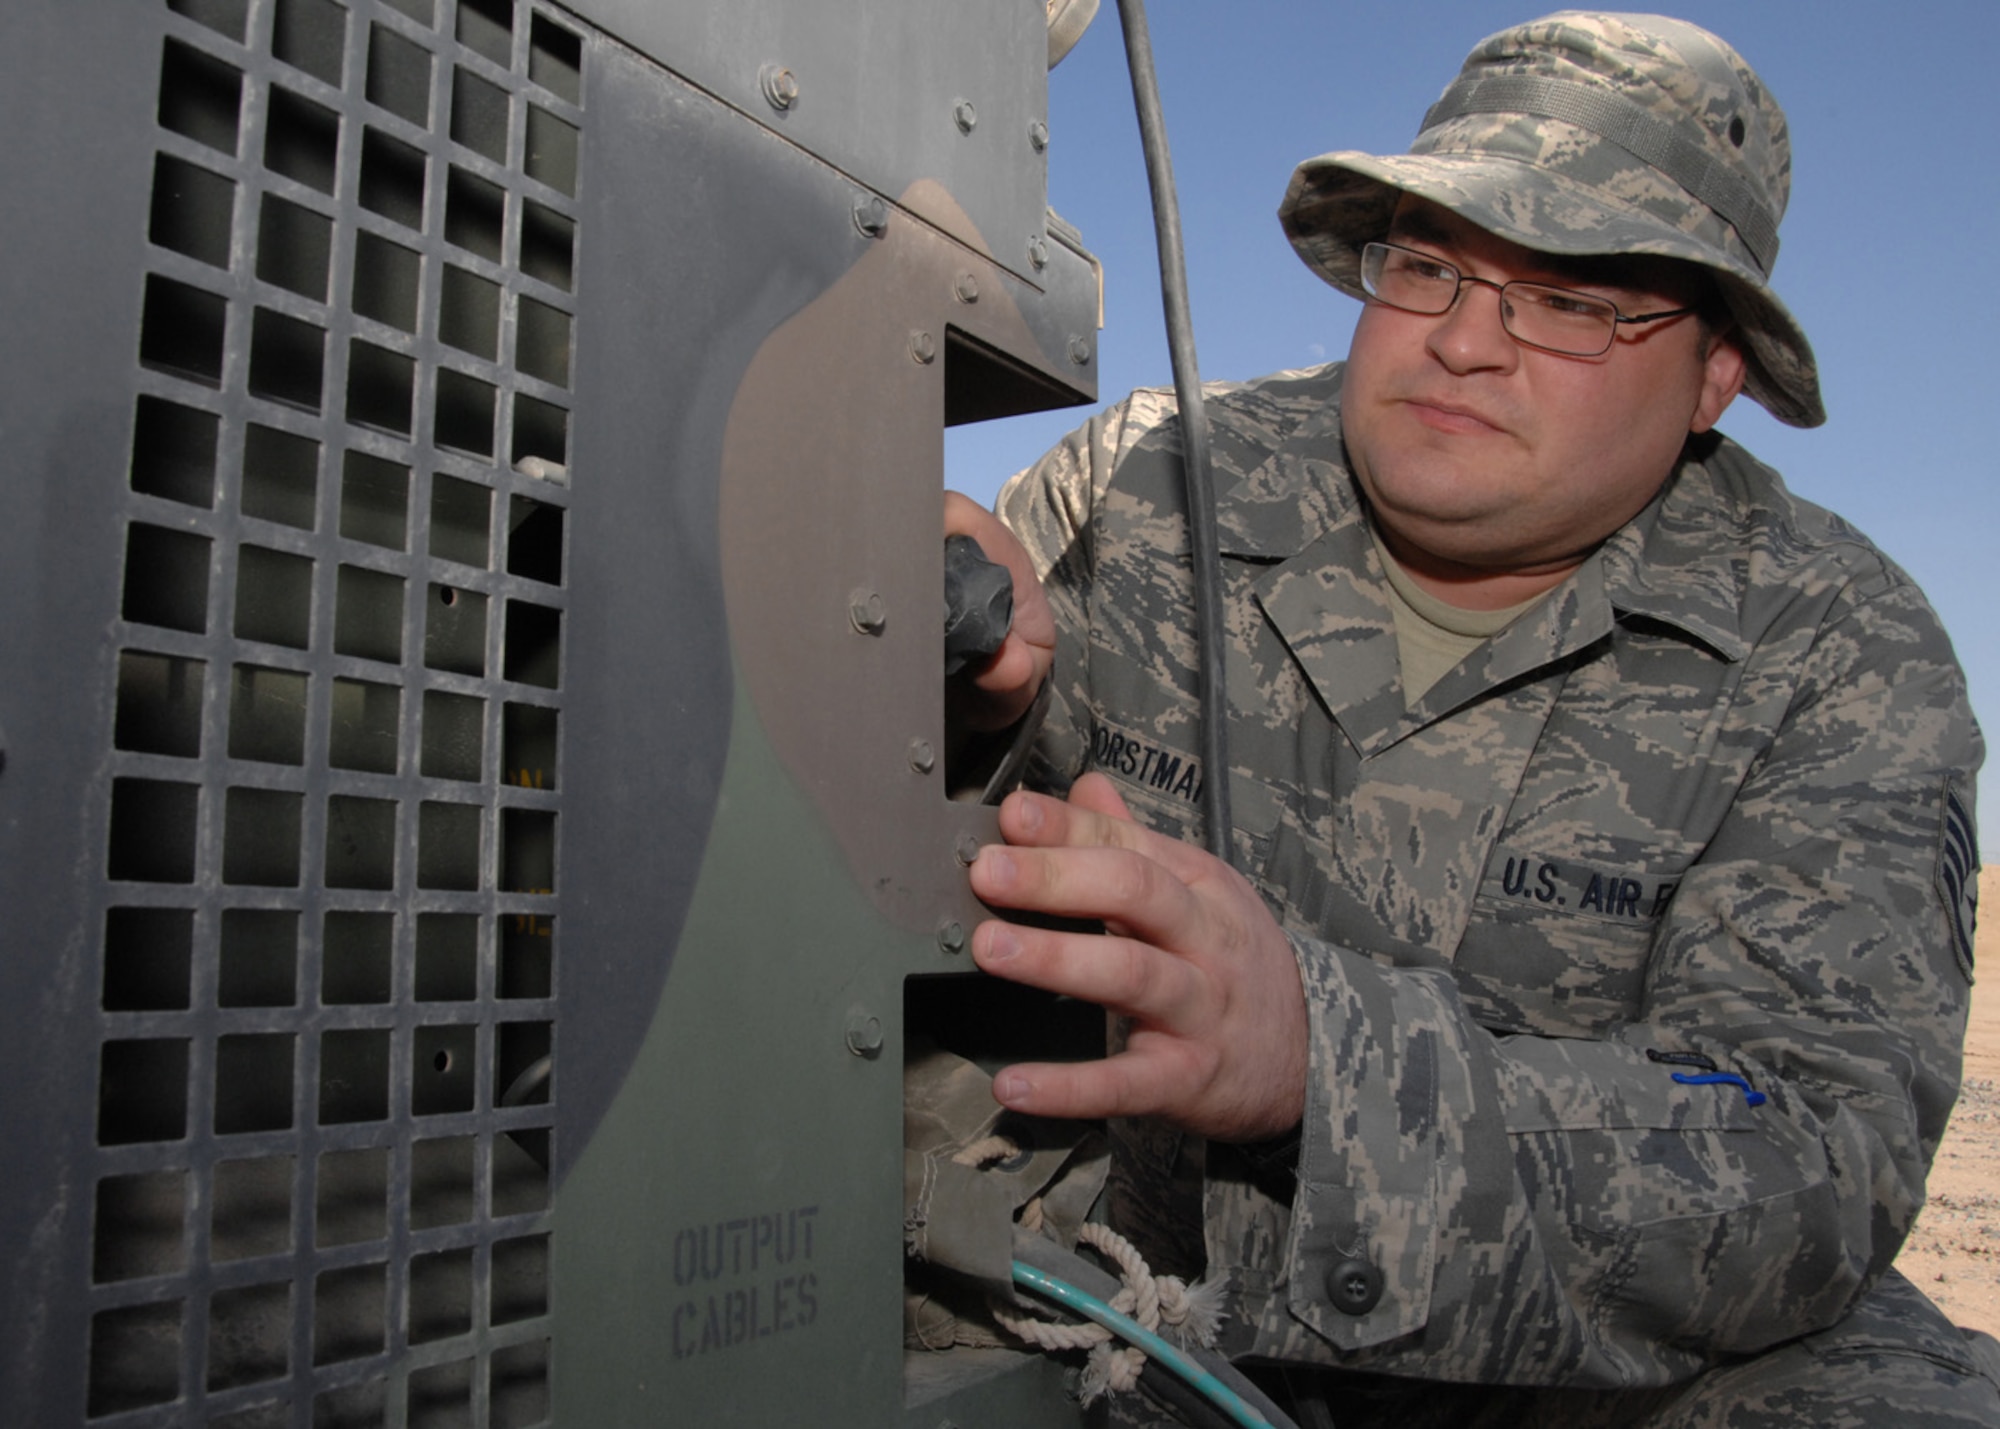 SOUTHWEST ASIA -- Staff Sgt. Wade Horstman, 386th Expeditionary Civil Engineer Squadron, conducts a weekly inspection on a generator connected to an airborne chemical detector at an air base in Southwest Asia, Feb. 4. Sergeant Horstman is the emergency management logistics non-commissioned officer in charge currently deployed from the 114th Fighter Wing at Foss Field, S.D.(U.S. Air Force photo/Senior Airman Courtney Richardson)